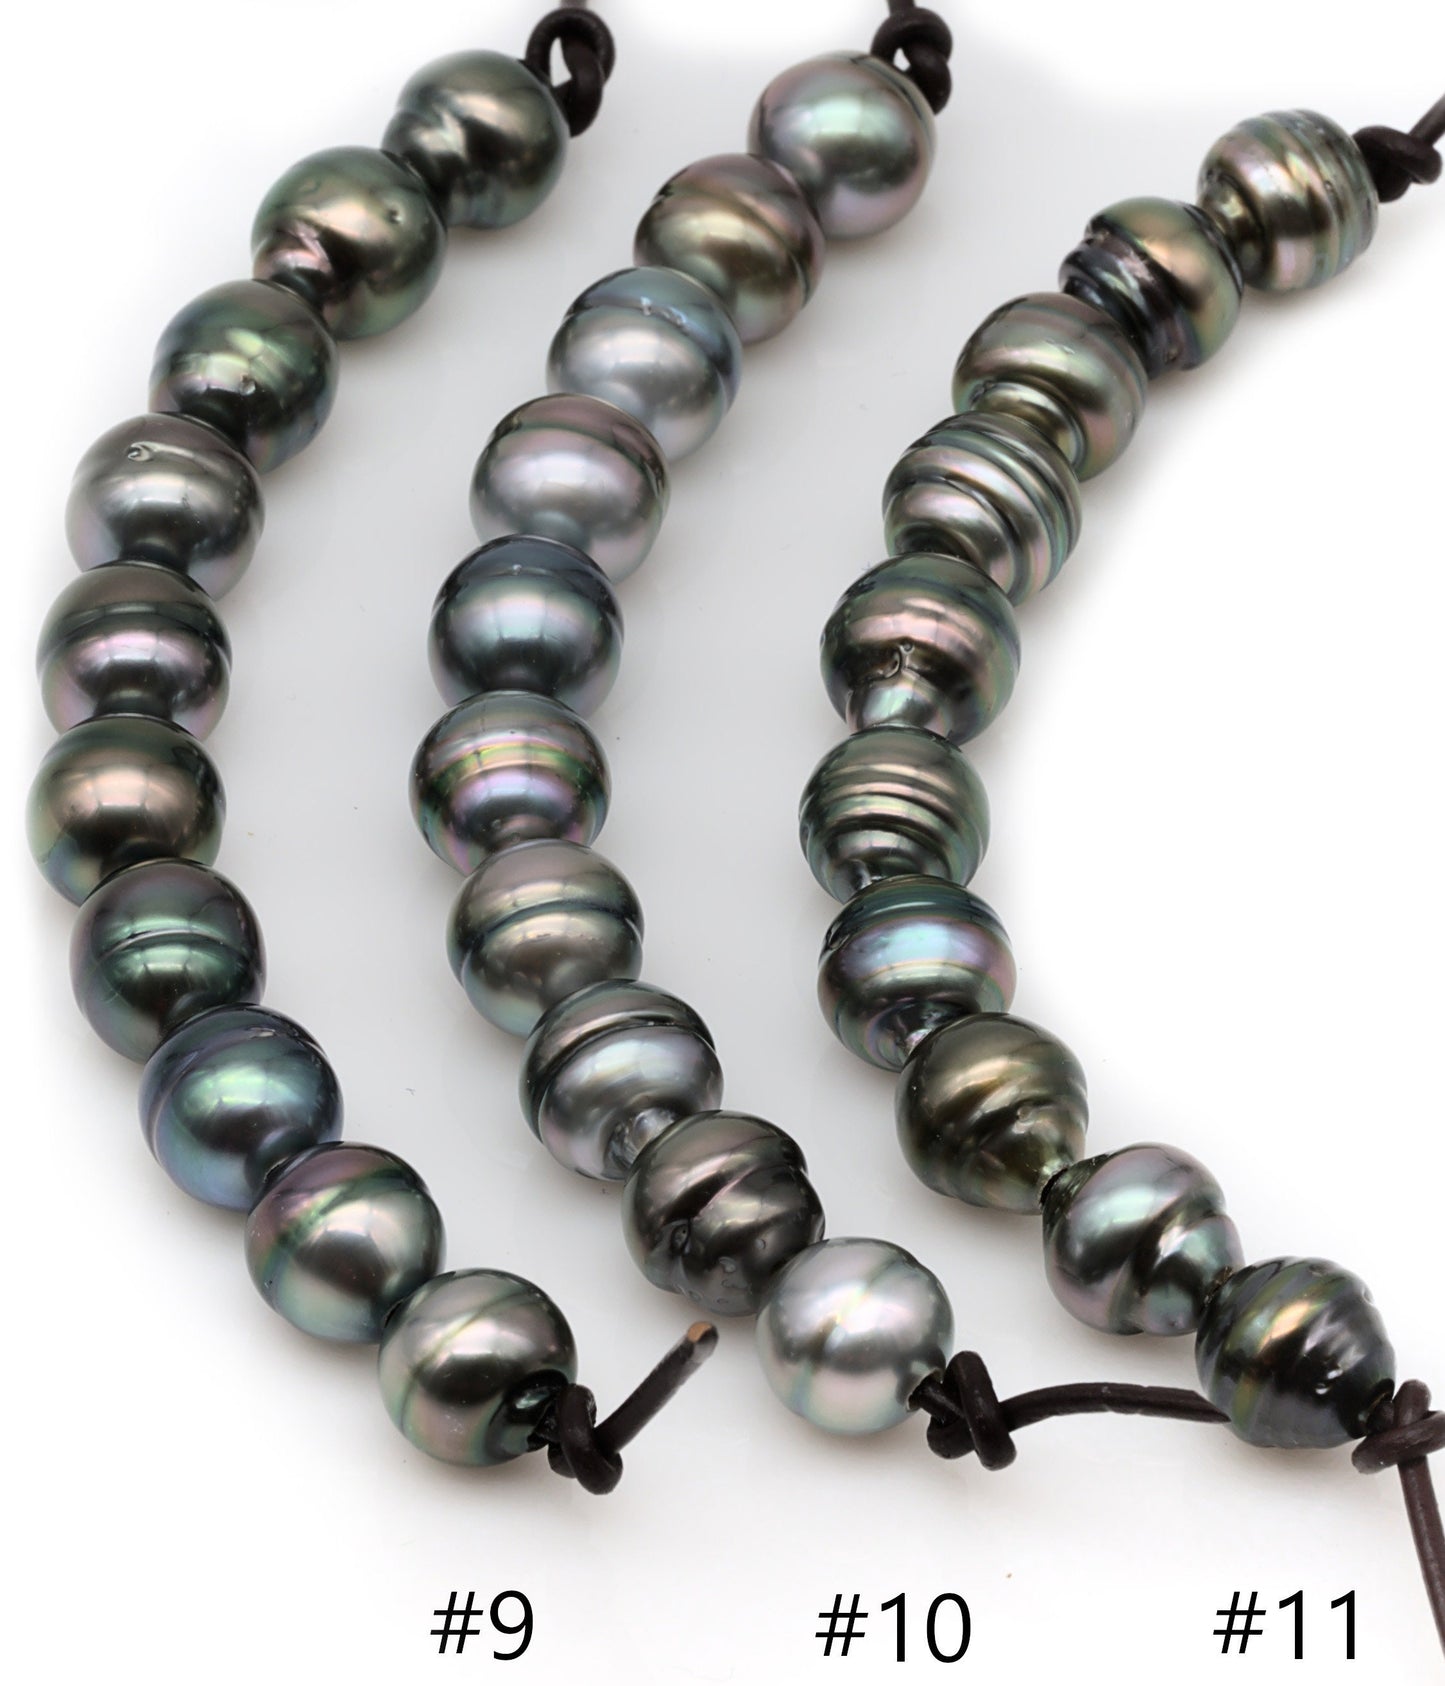 Tahitian Black Pearls Large Hole, Circle Tear Drop Pearl Beads with 2mm Hole in 9.5-10mm, High Luster, SKU# 1014TH